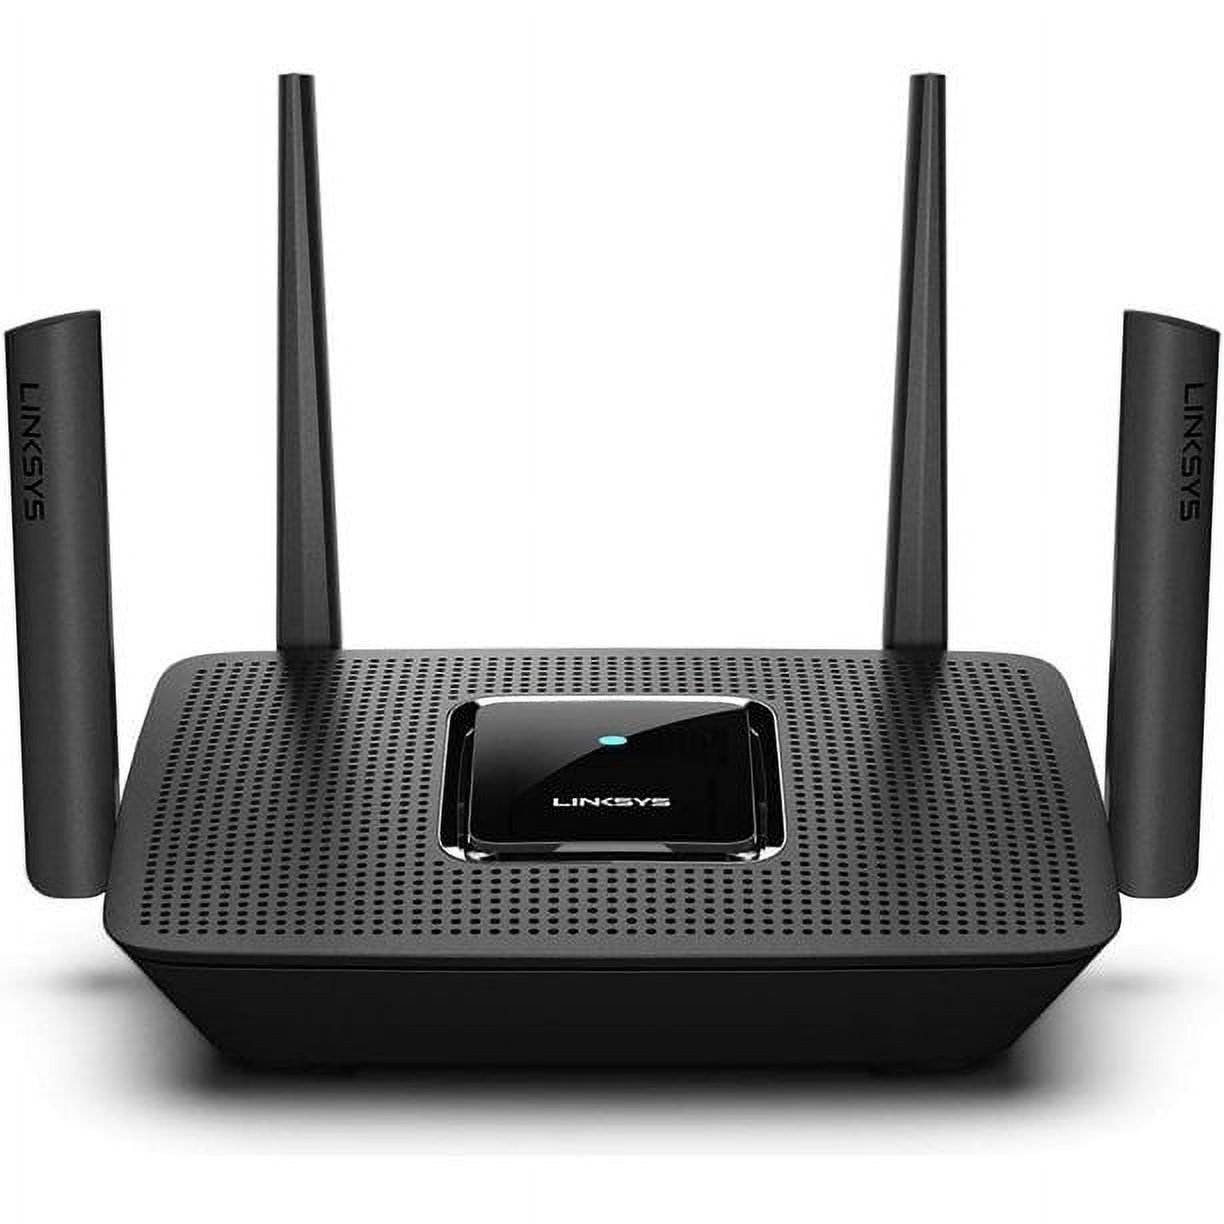 Restored Linksys MR9000 Mesh Wi-Fi Router (Tri-Band Router, Wireless Mesh Router for Home AC3000), Future-Proof MU-Mimo Fast Wireless Router (Refurbished) - image 1 of 7